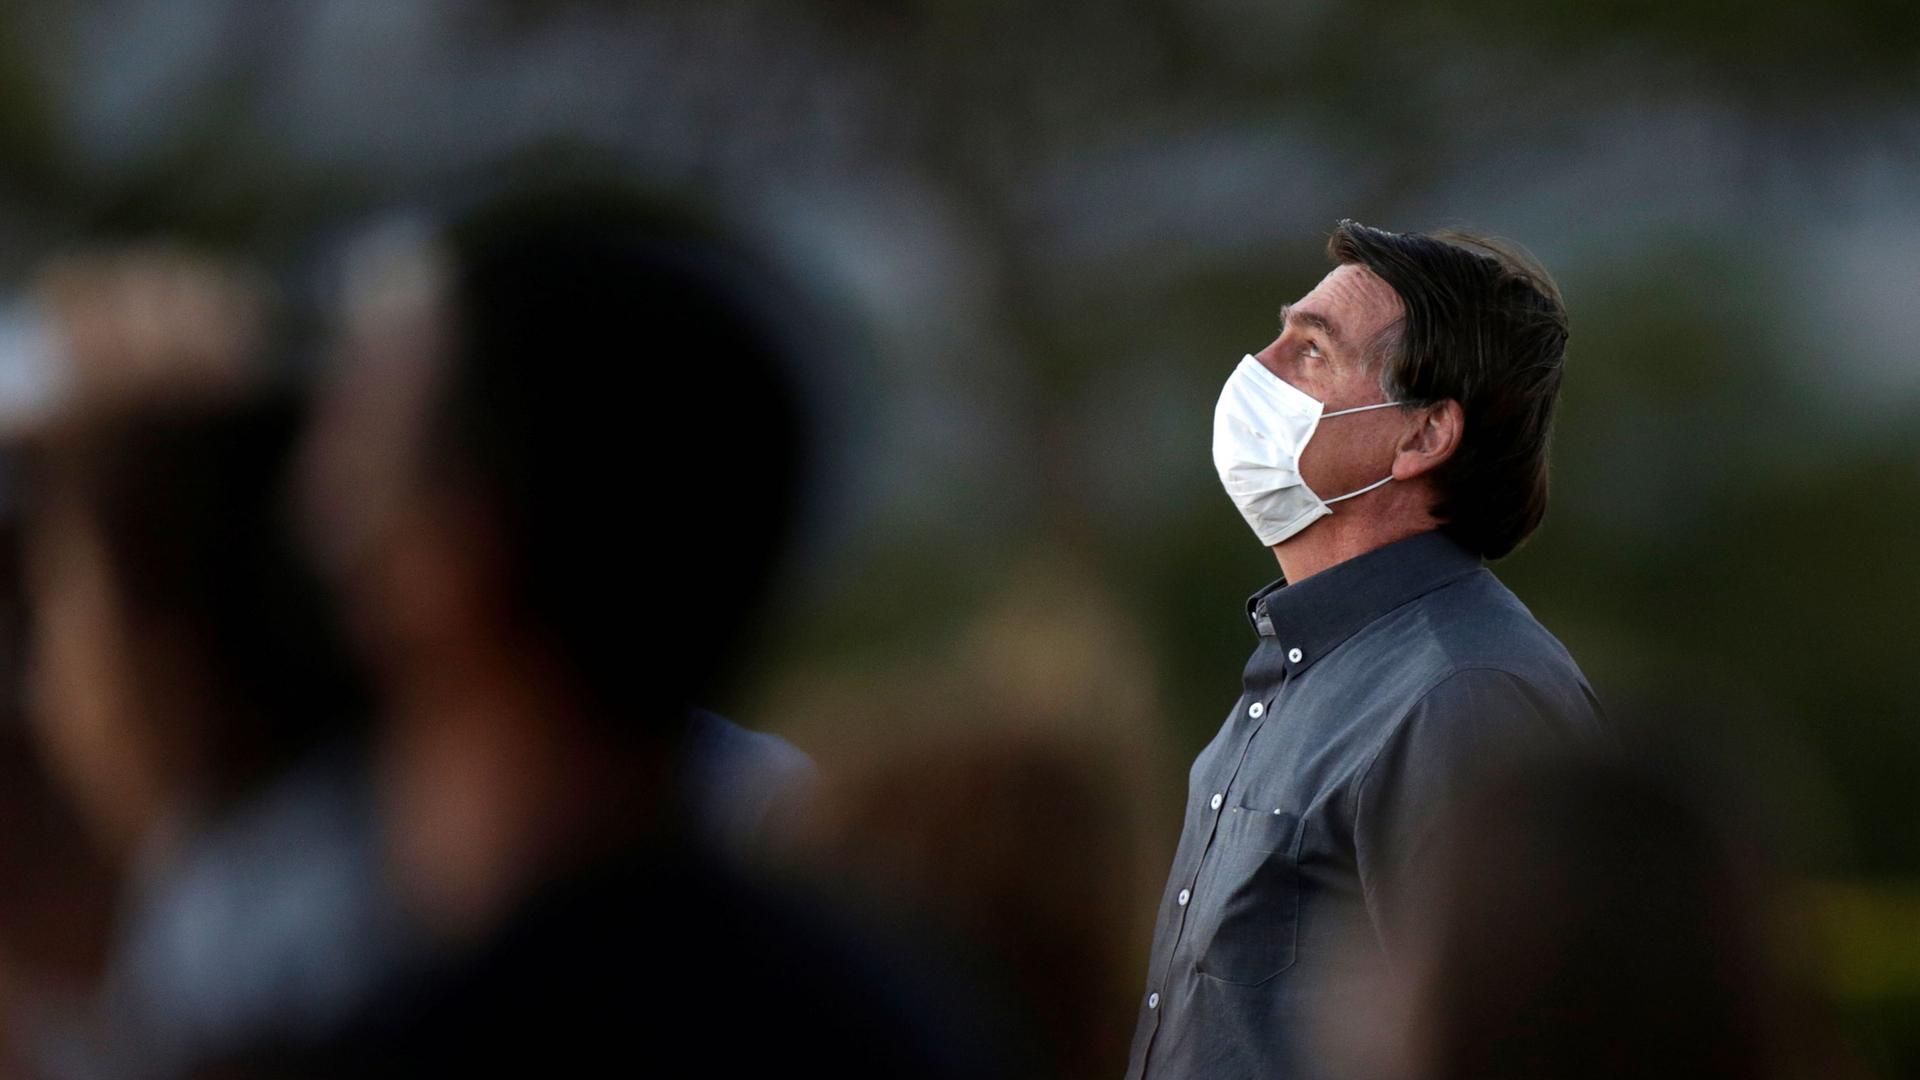 Brazil's President Jair Bolsonaro is seen during a ceremony to lower the Brazilian National flag down for the night, at the Alvorada Palace, amid the coronavirus outbreak in Brasília, Brazil, July 20, 2020.